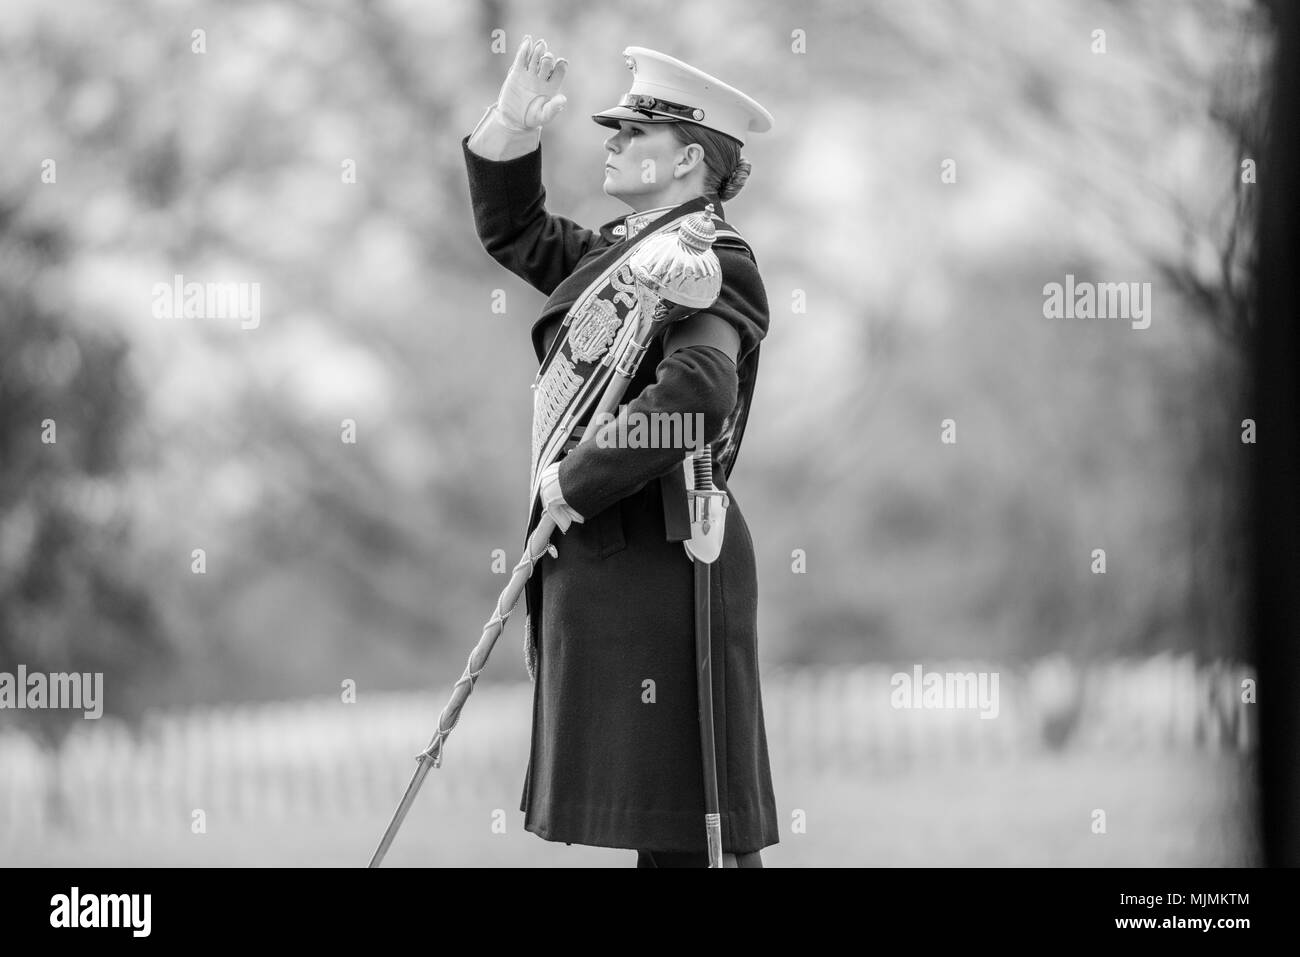 Assistant Drum Major Gunnery Sgt. Stacie Crowther conducts The United States Marine Band, 'The President's Own” during the full honors funeral of U.S. Marine Corps Pvt. Archie Newell in Section 60 of Arlington National Cemetery, Arlington, Va., Dec. 8, 2017.  Assigned to Company C, 2nd Tank Battalion, 2nd Marine Division in 1943, Newell died when his division attempted to secure the small island of Betio in the Tarawa Atoll from the Japanese.  Though the battle lasted several days, Newell died on the first day of battle, Nov. 20, 1943.  Initially, after the fighting on Tarawa, U.S. service mem Stock Photo